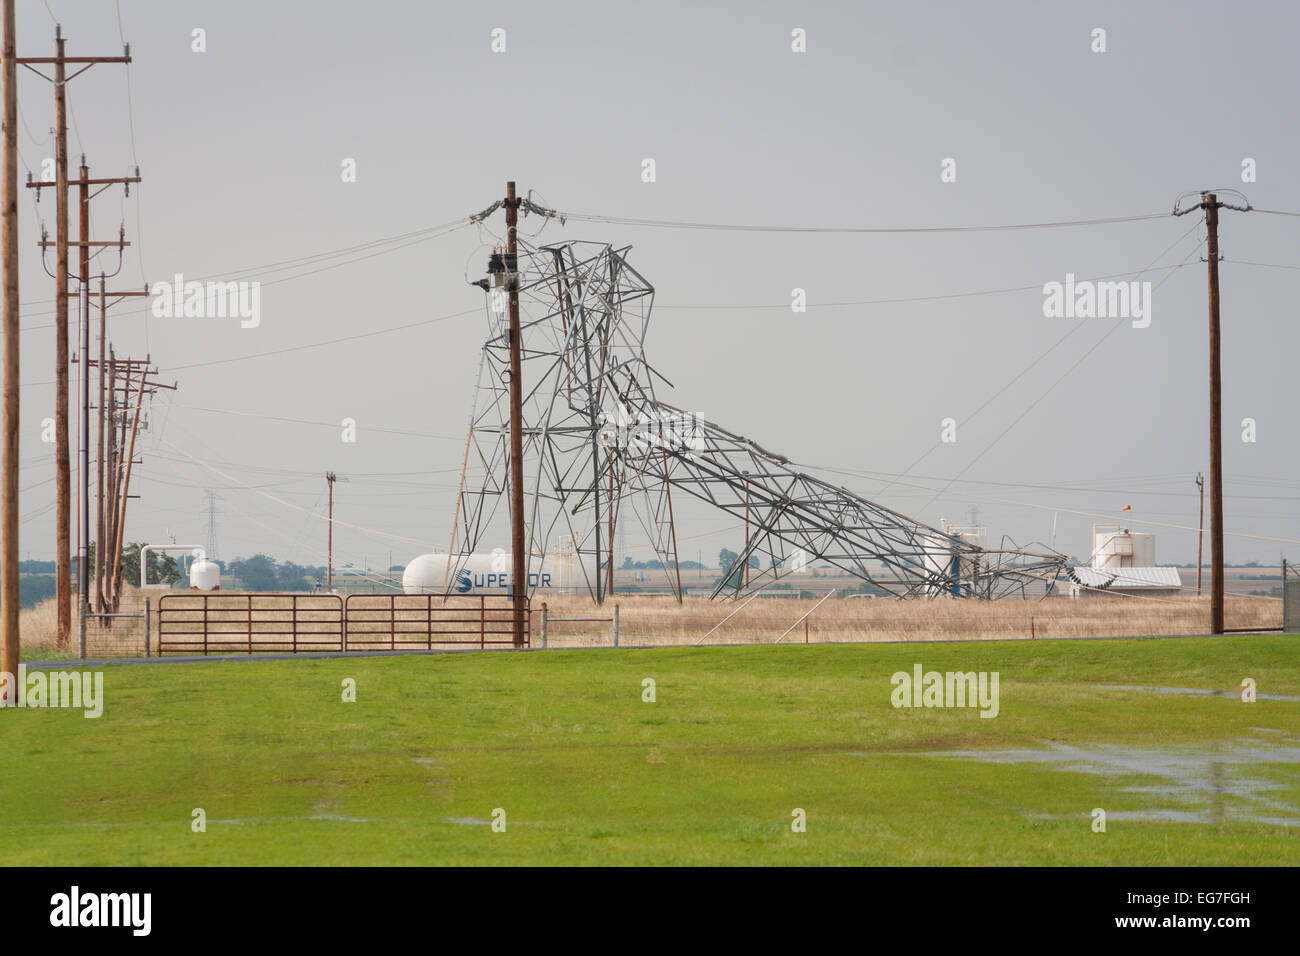 An metal truss electrical tower collapses after taking a direct strike from a powerful EF-5 tornado near Piedmont Oklahoma. Stock Photo